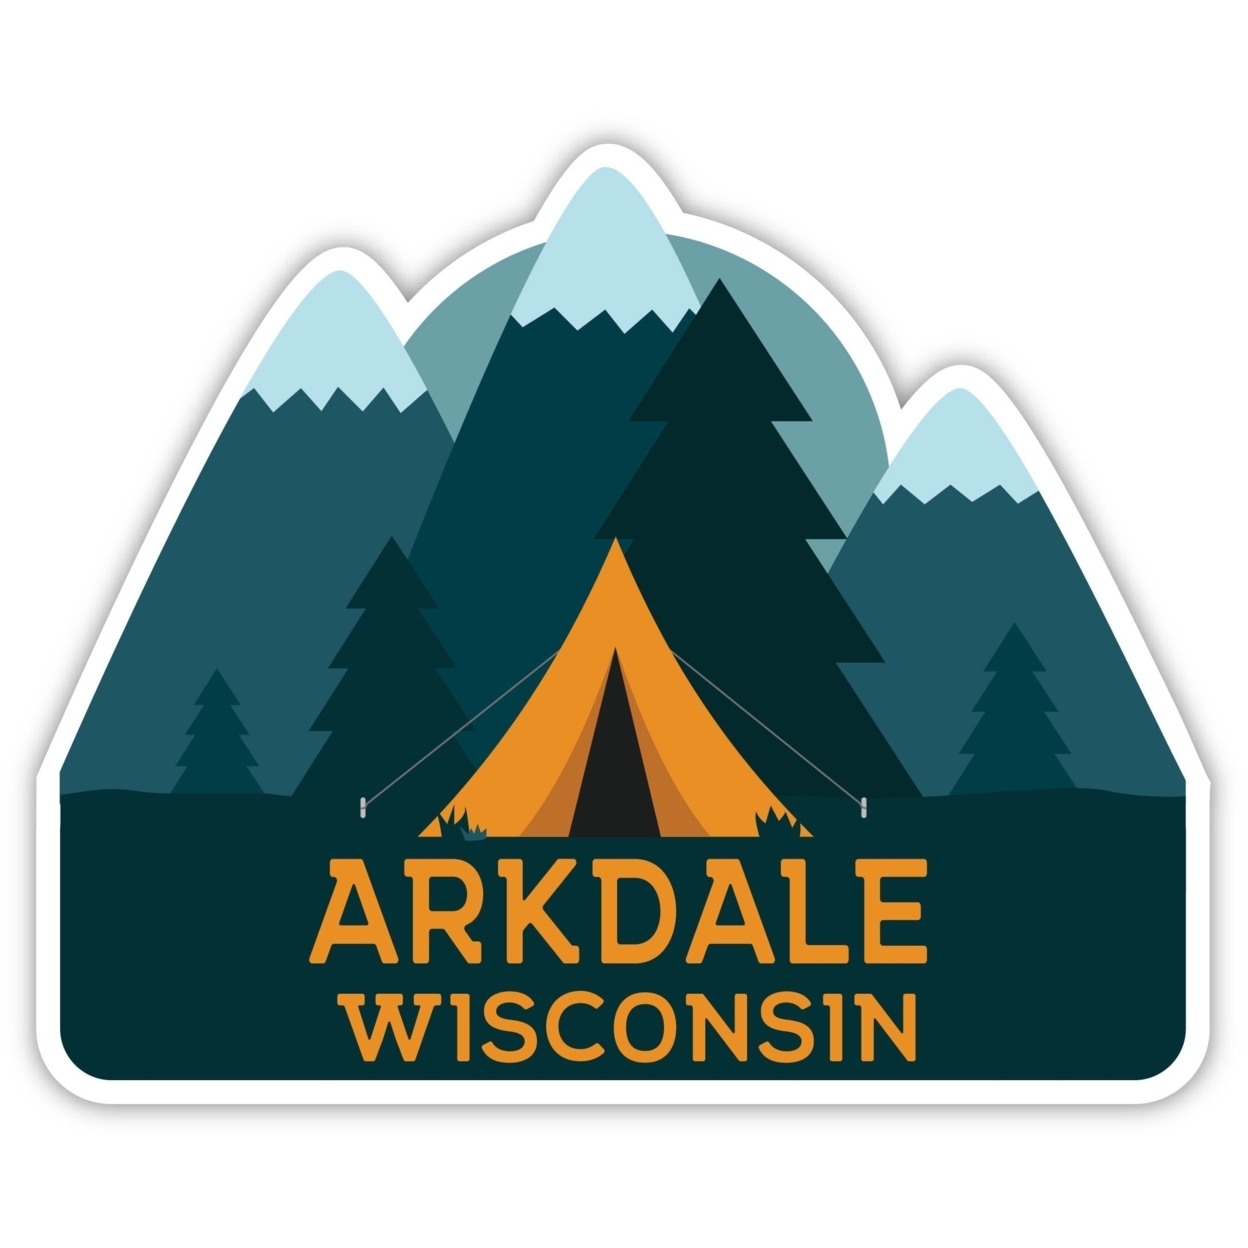 Arkdale Wisconsin Souvenir Decorative Stickers (Choose Theme And Size) - Single Unit, 10-Inch, Bear